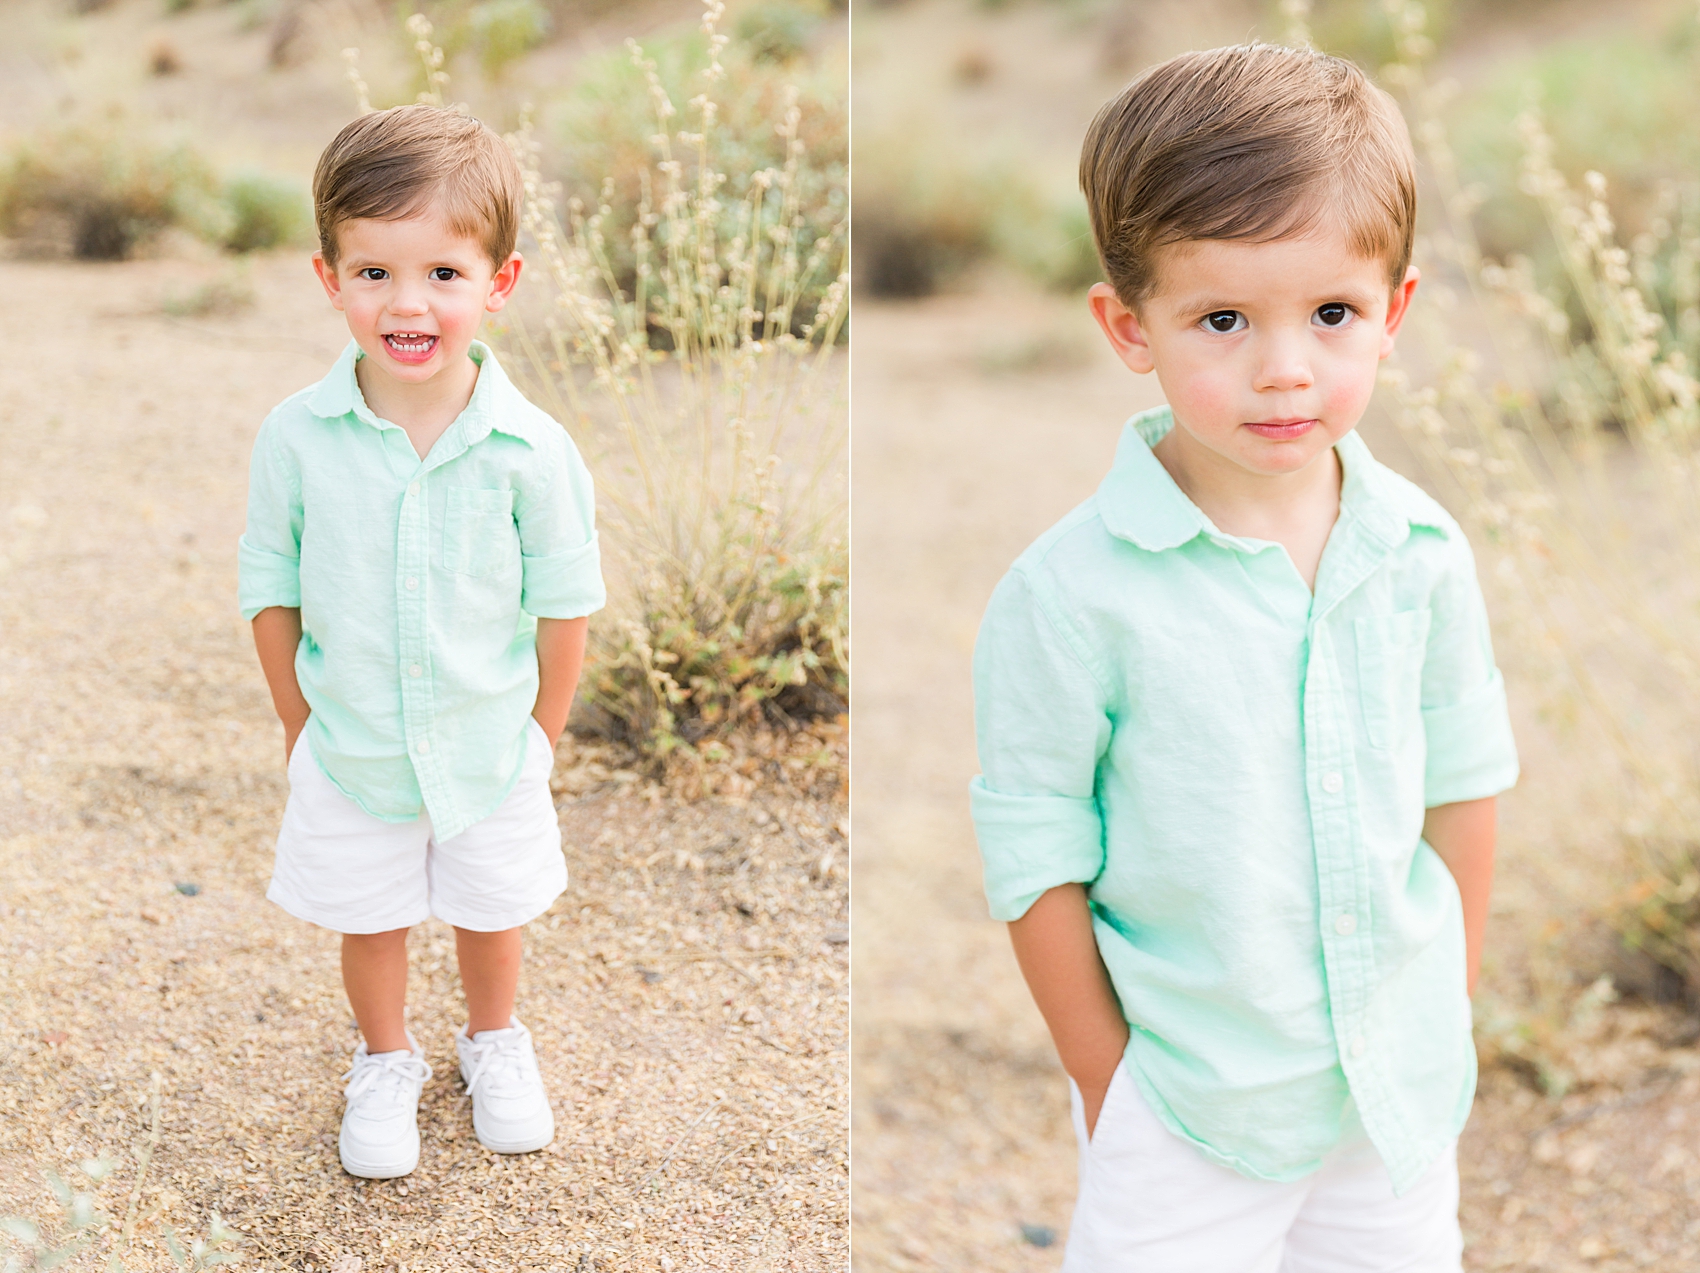 Leah Hope Photography | Scottsdale Phoenix Arizona | Home Backyard Family Photos | Family Pictures | What to Wear | Family Poses | Family of Three | Gender Reveal | Baby Gender Announcement